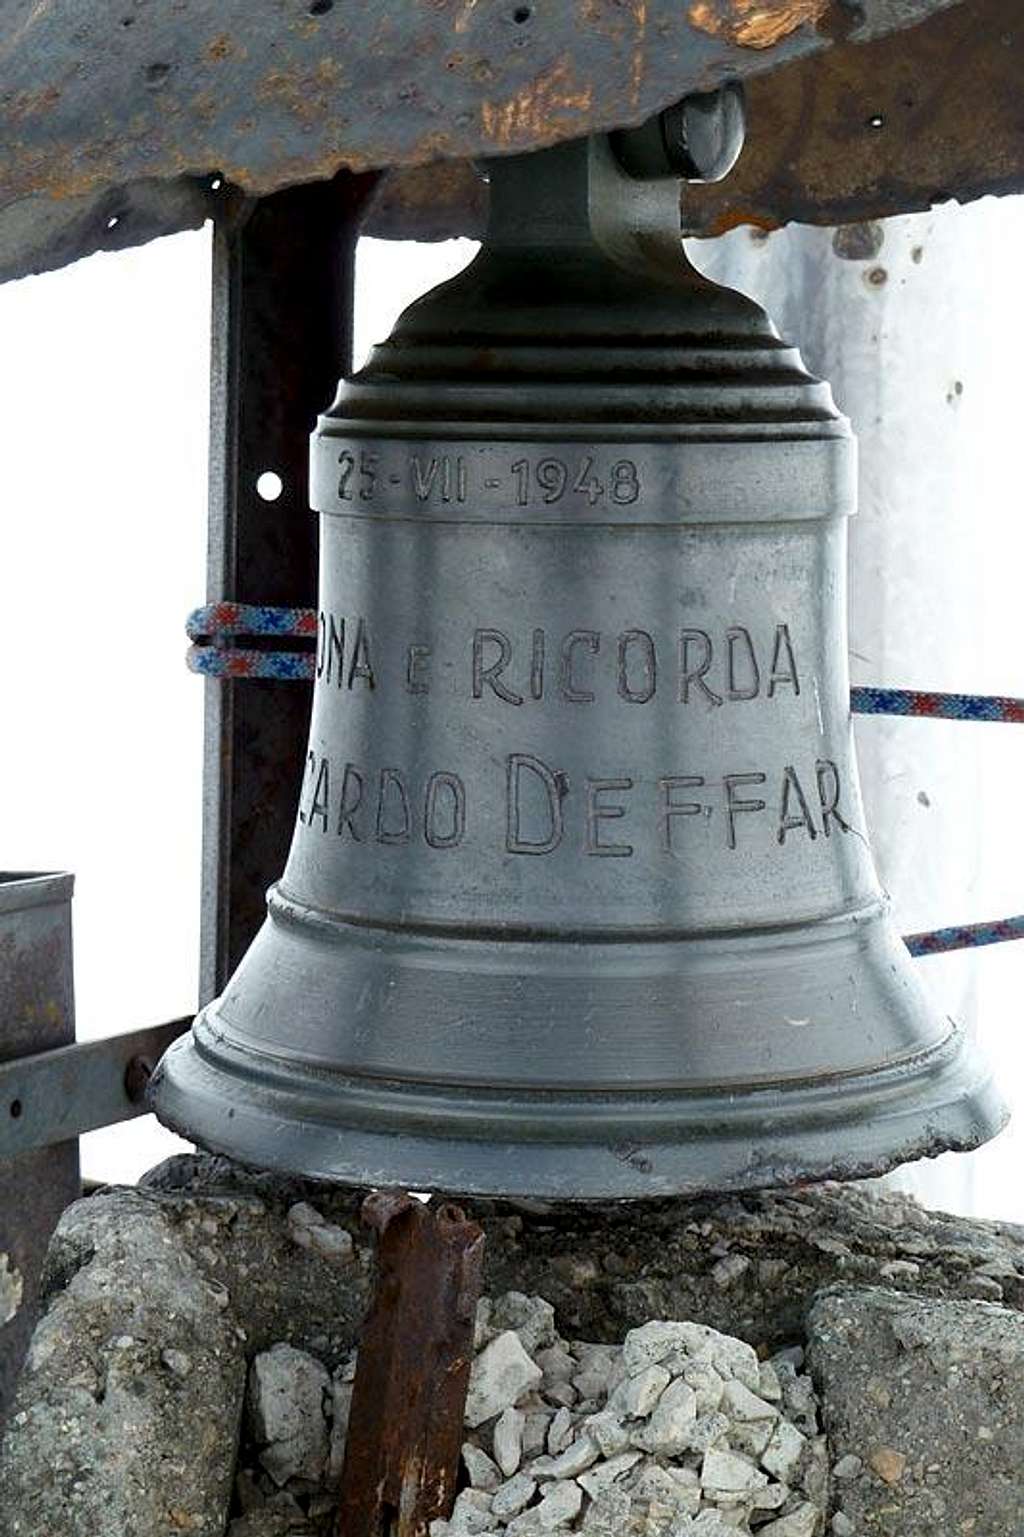 The bell on the summit